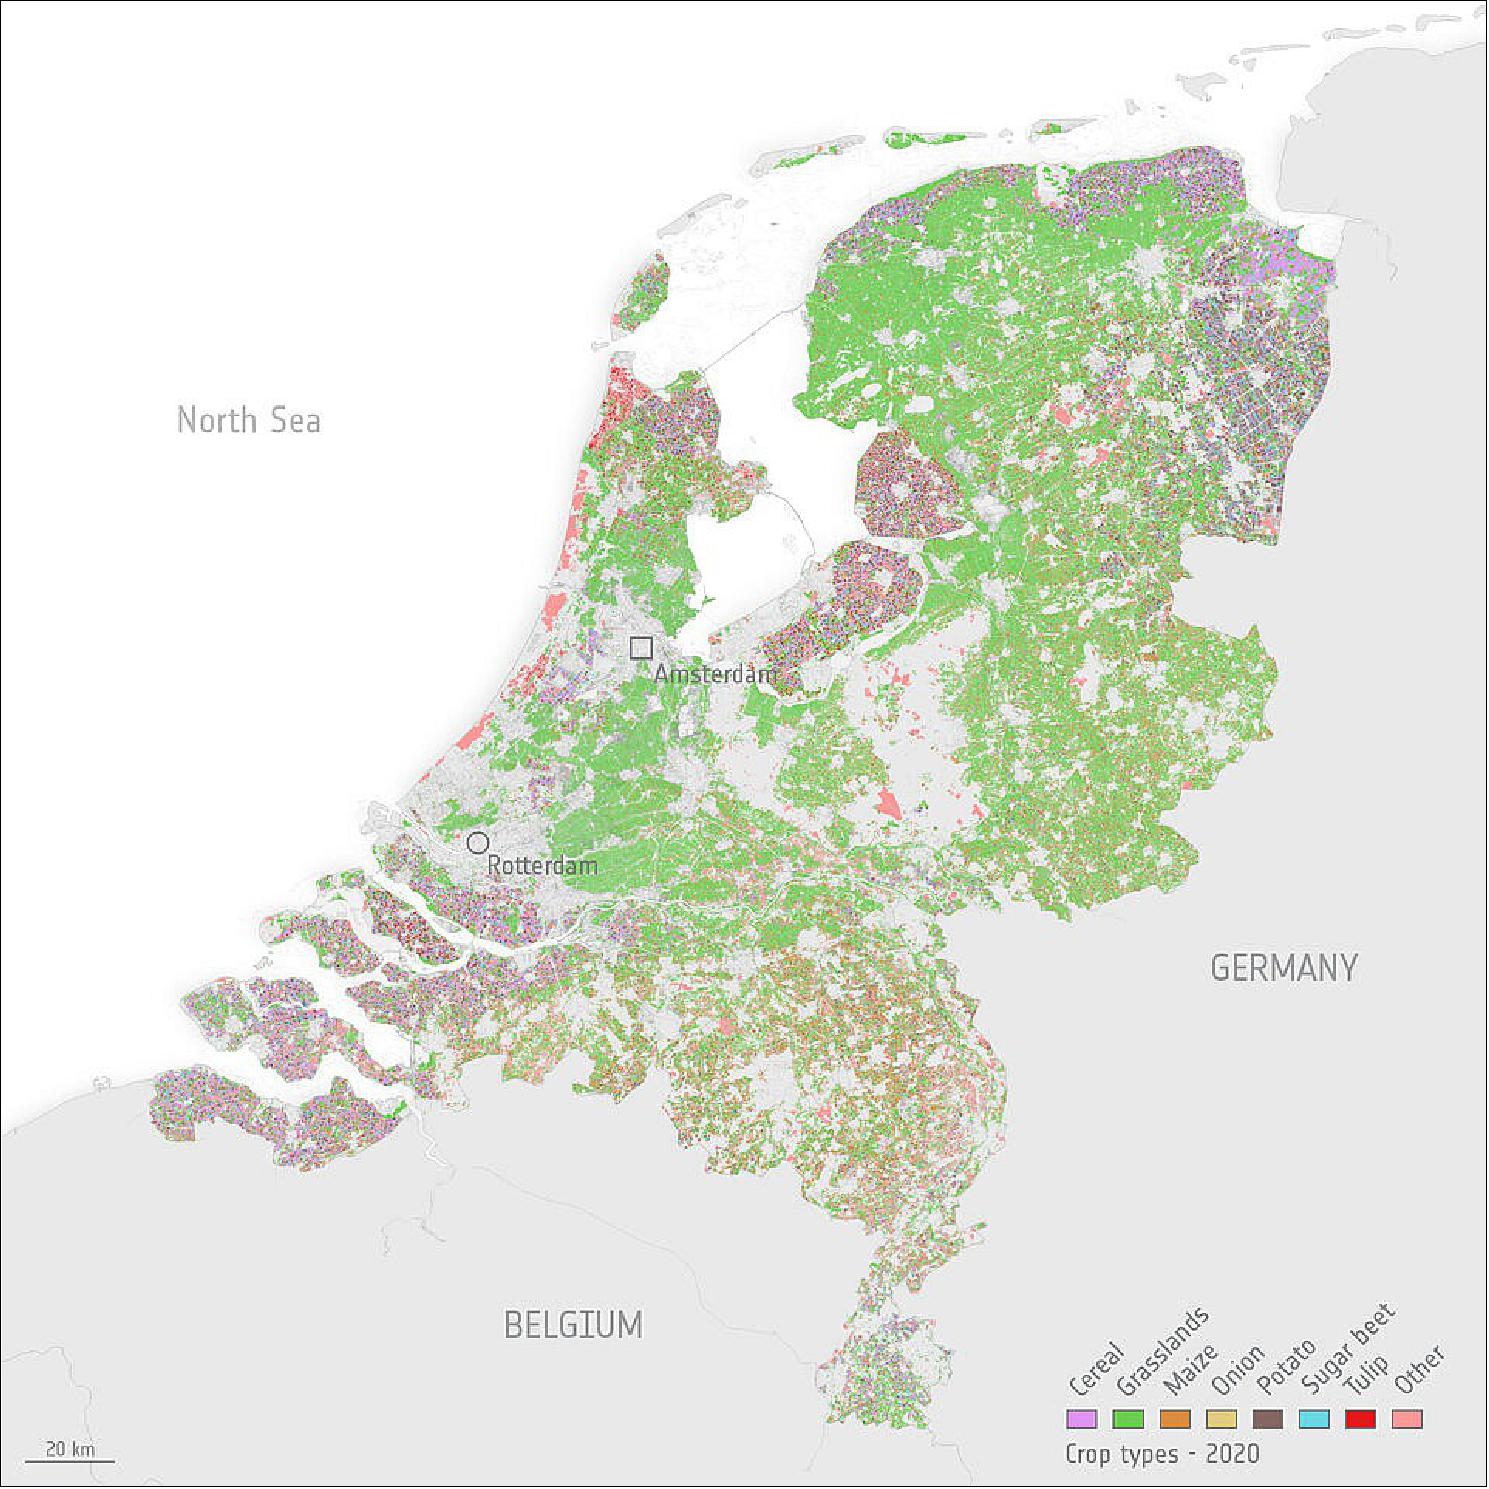  Crop type for all agricultural parcels in the Netherlands. 